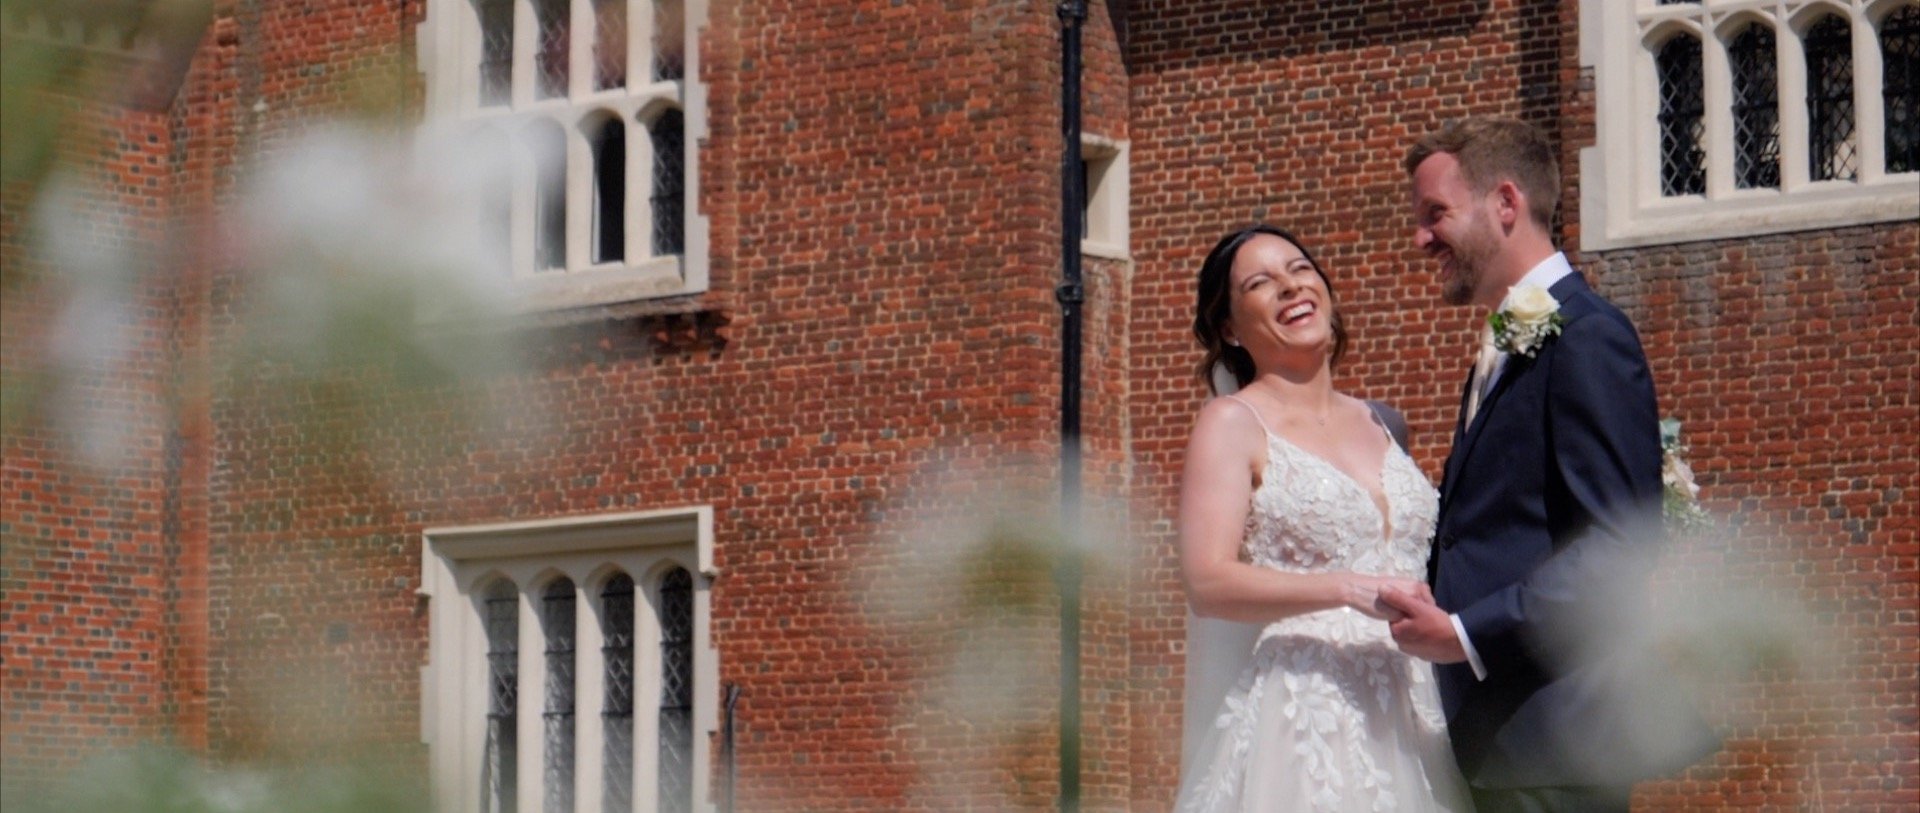 Laughter from the bride and groom at Gosfield Hall - Essex.jpg